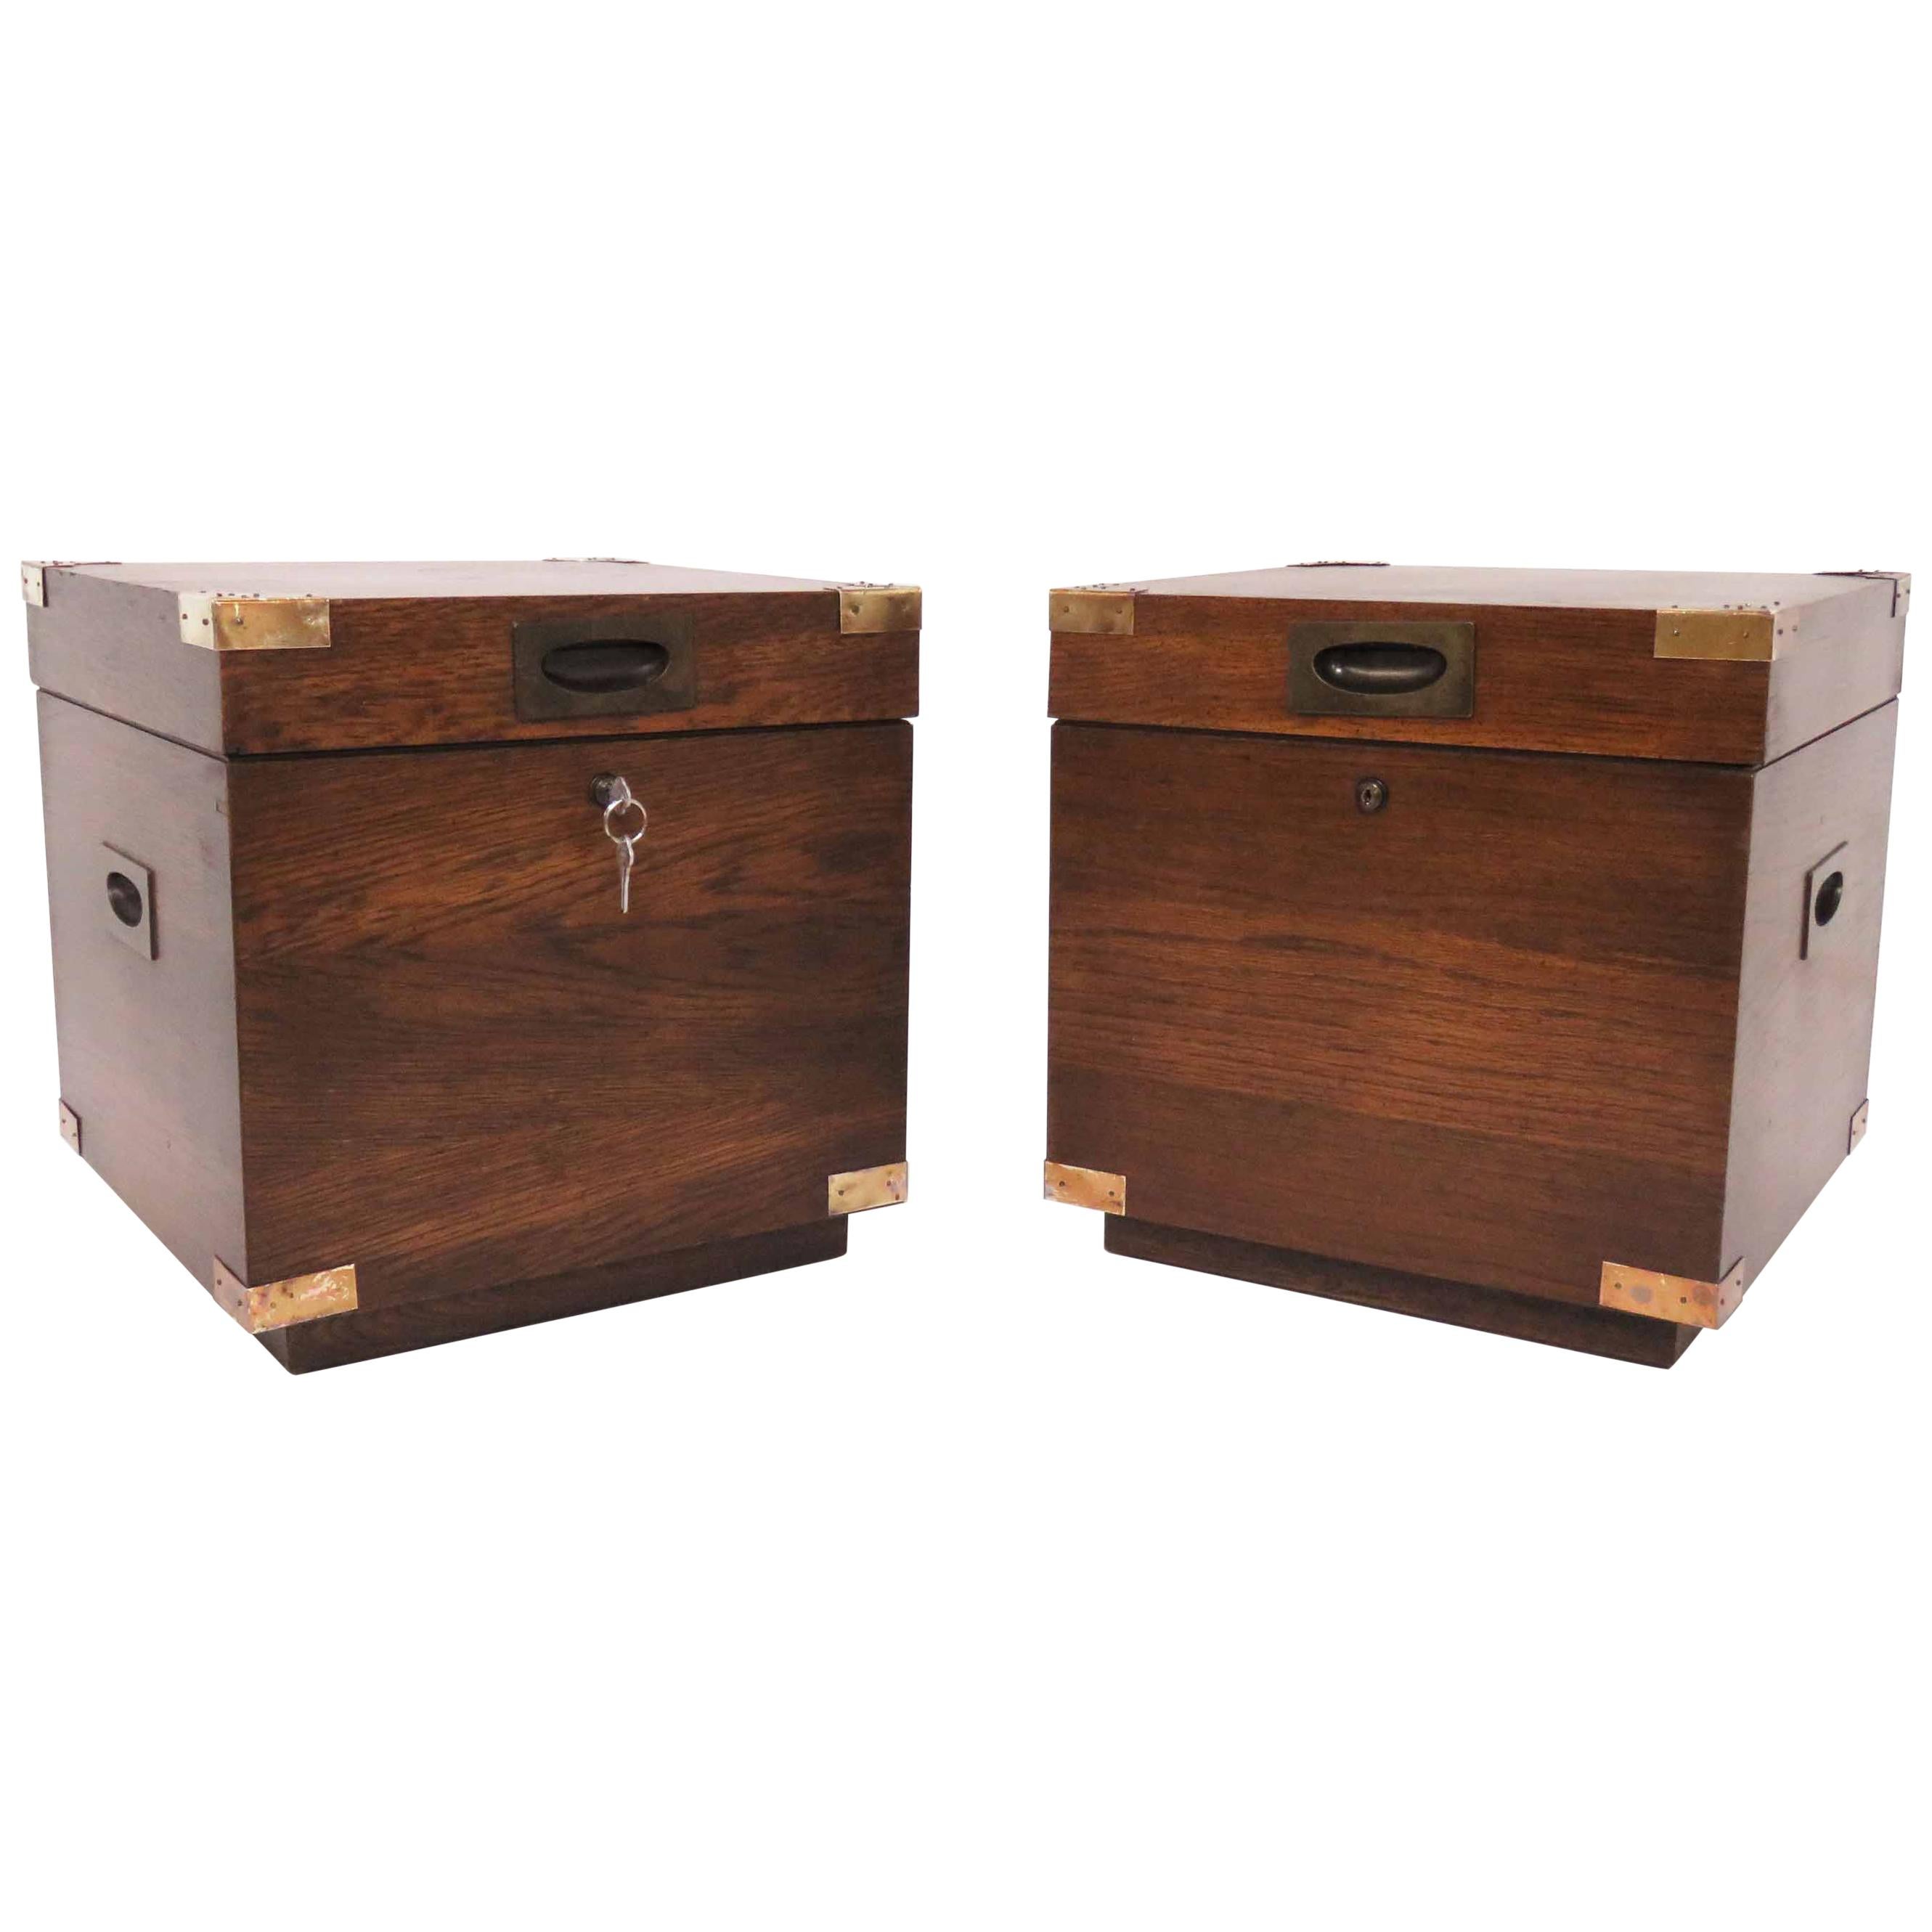 Pair of Midcentury Campaign Style Cube Form Chests by Lane Furniture